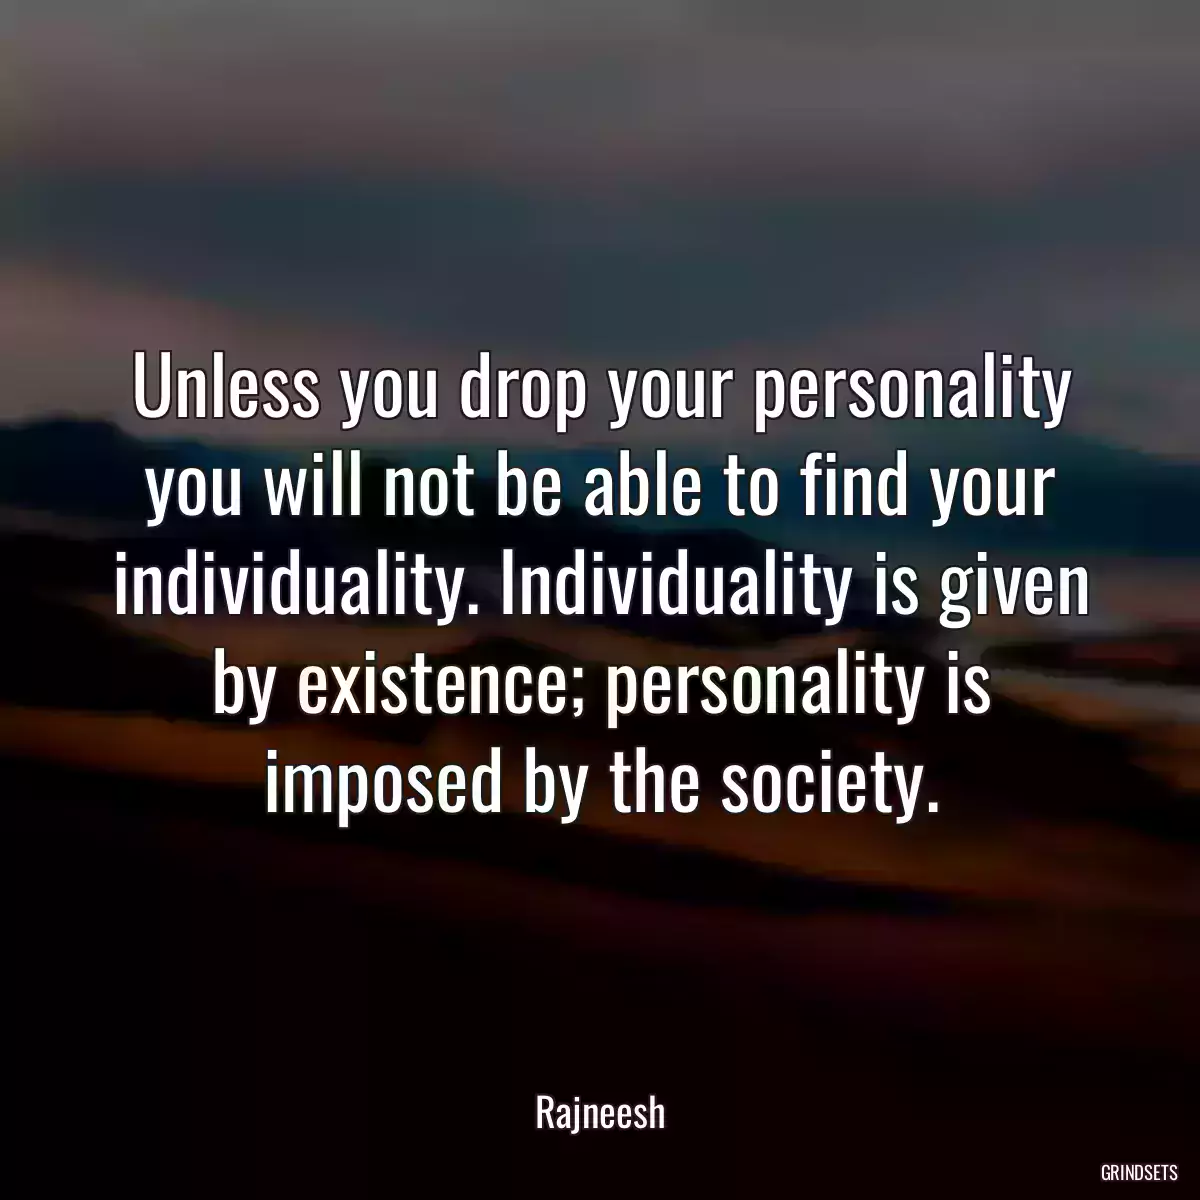 Unless you drop your personality you will not be able to find your individuality. Individuality is given by existence; personality is imposed by the society.